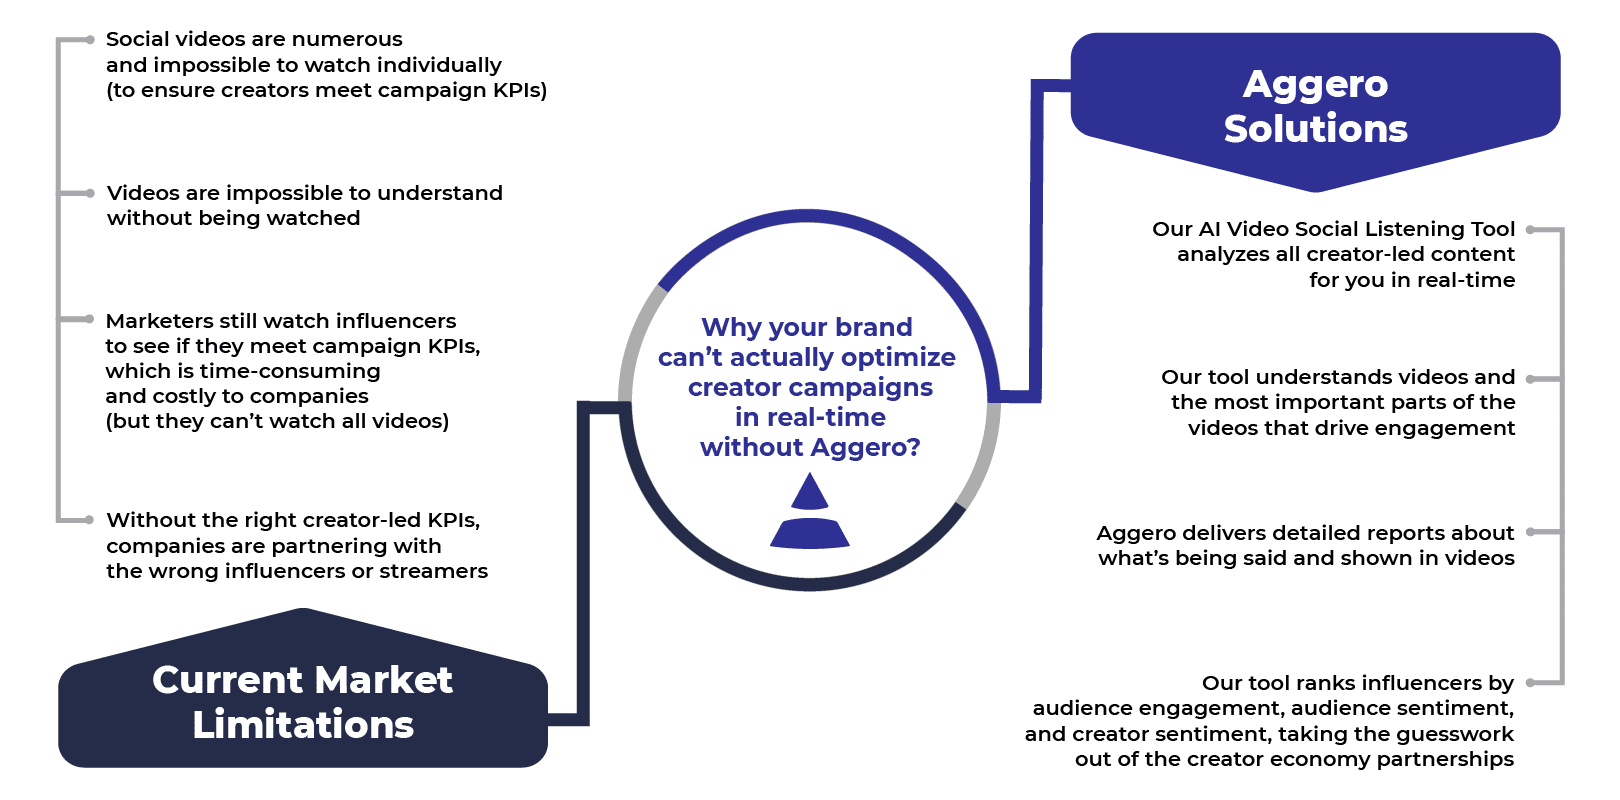 influencer campaign optimization at the current state vs aggero solutions